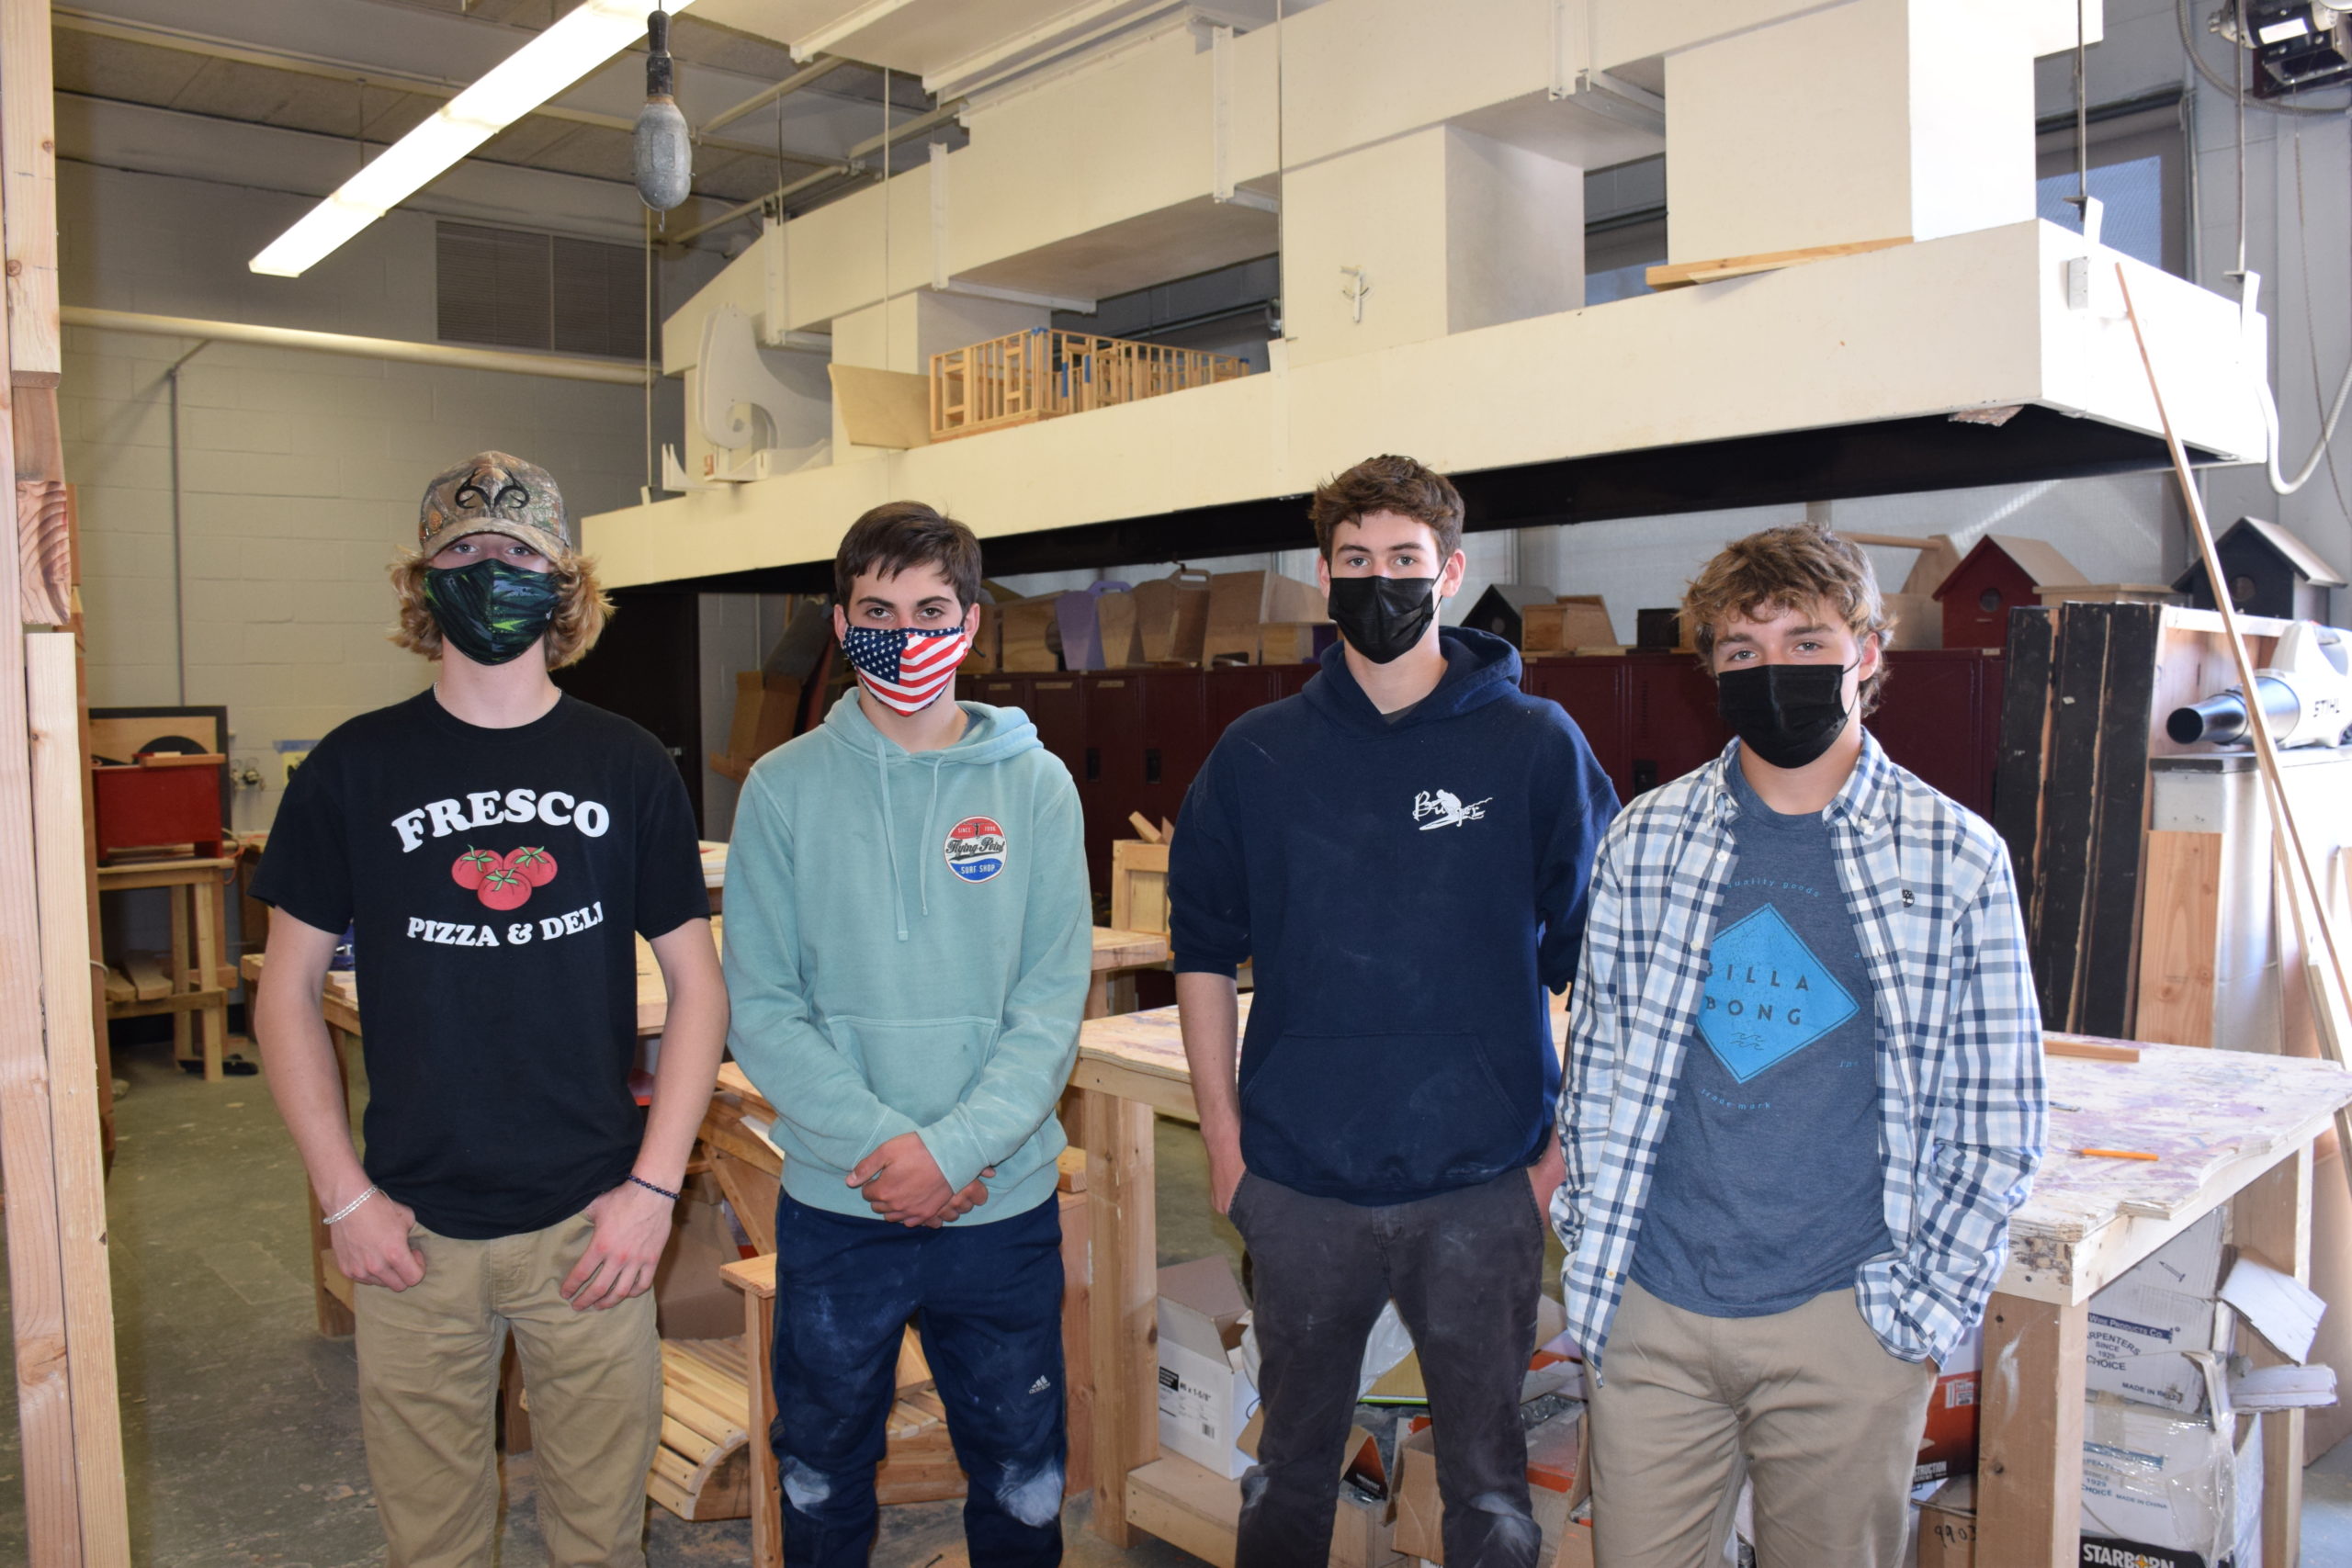 Southampton High School shop students will get hands-on experience by shadowing construction workers at their school this fall.